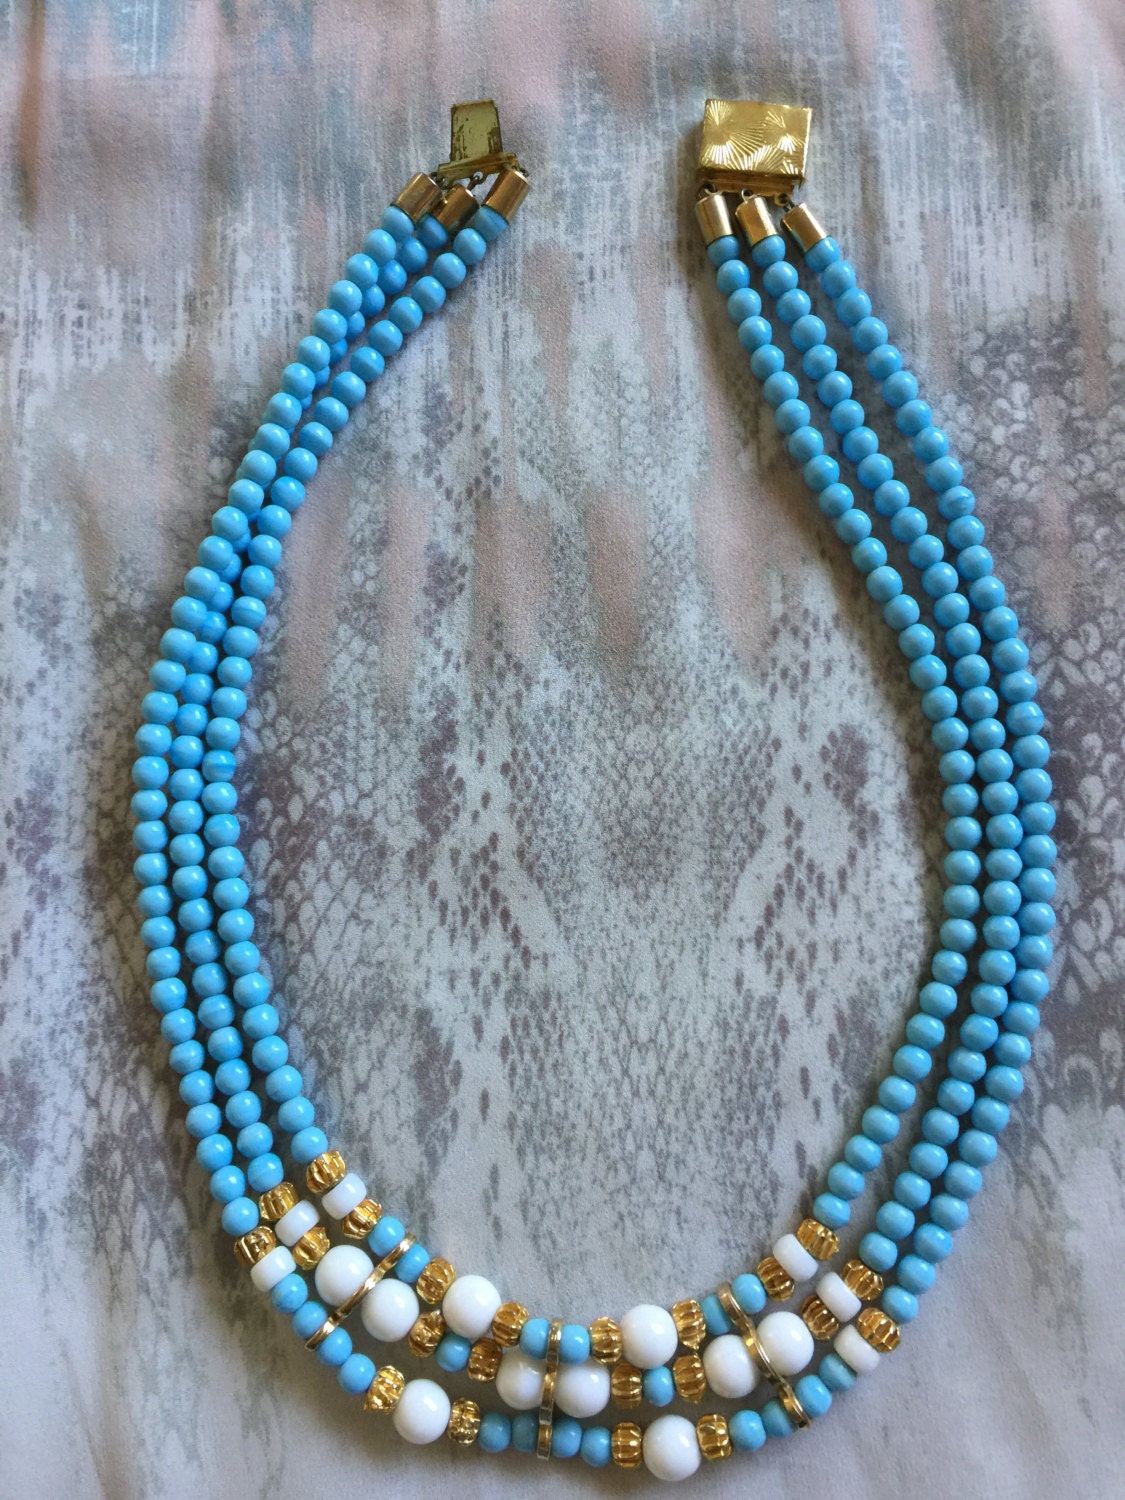 80s Multi Strand Faux Turquoise and Milk Glass Bead Necklace - Etsy